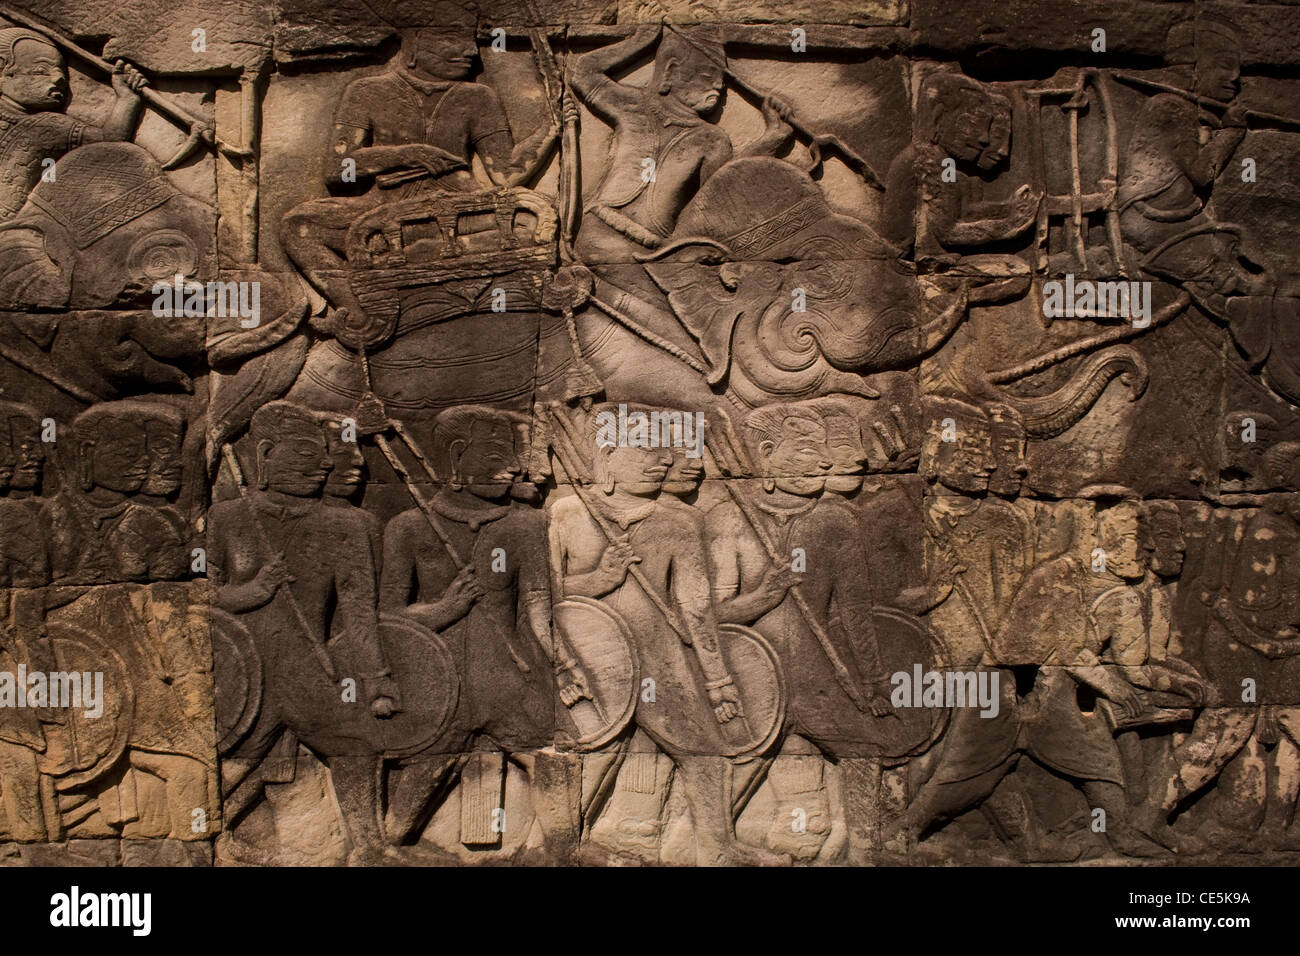 Bass reliefs depicting a Khmer army on the march at the temple of Bayon in Angkor, Cambodia. Stock Photo